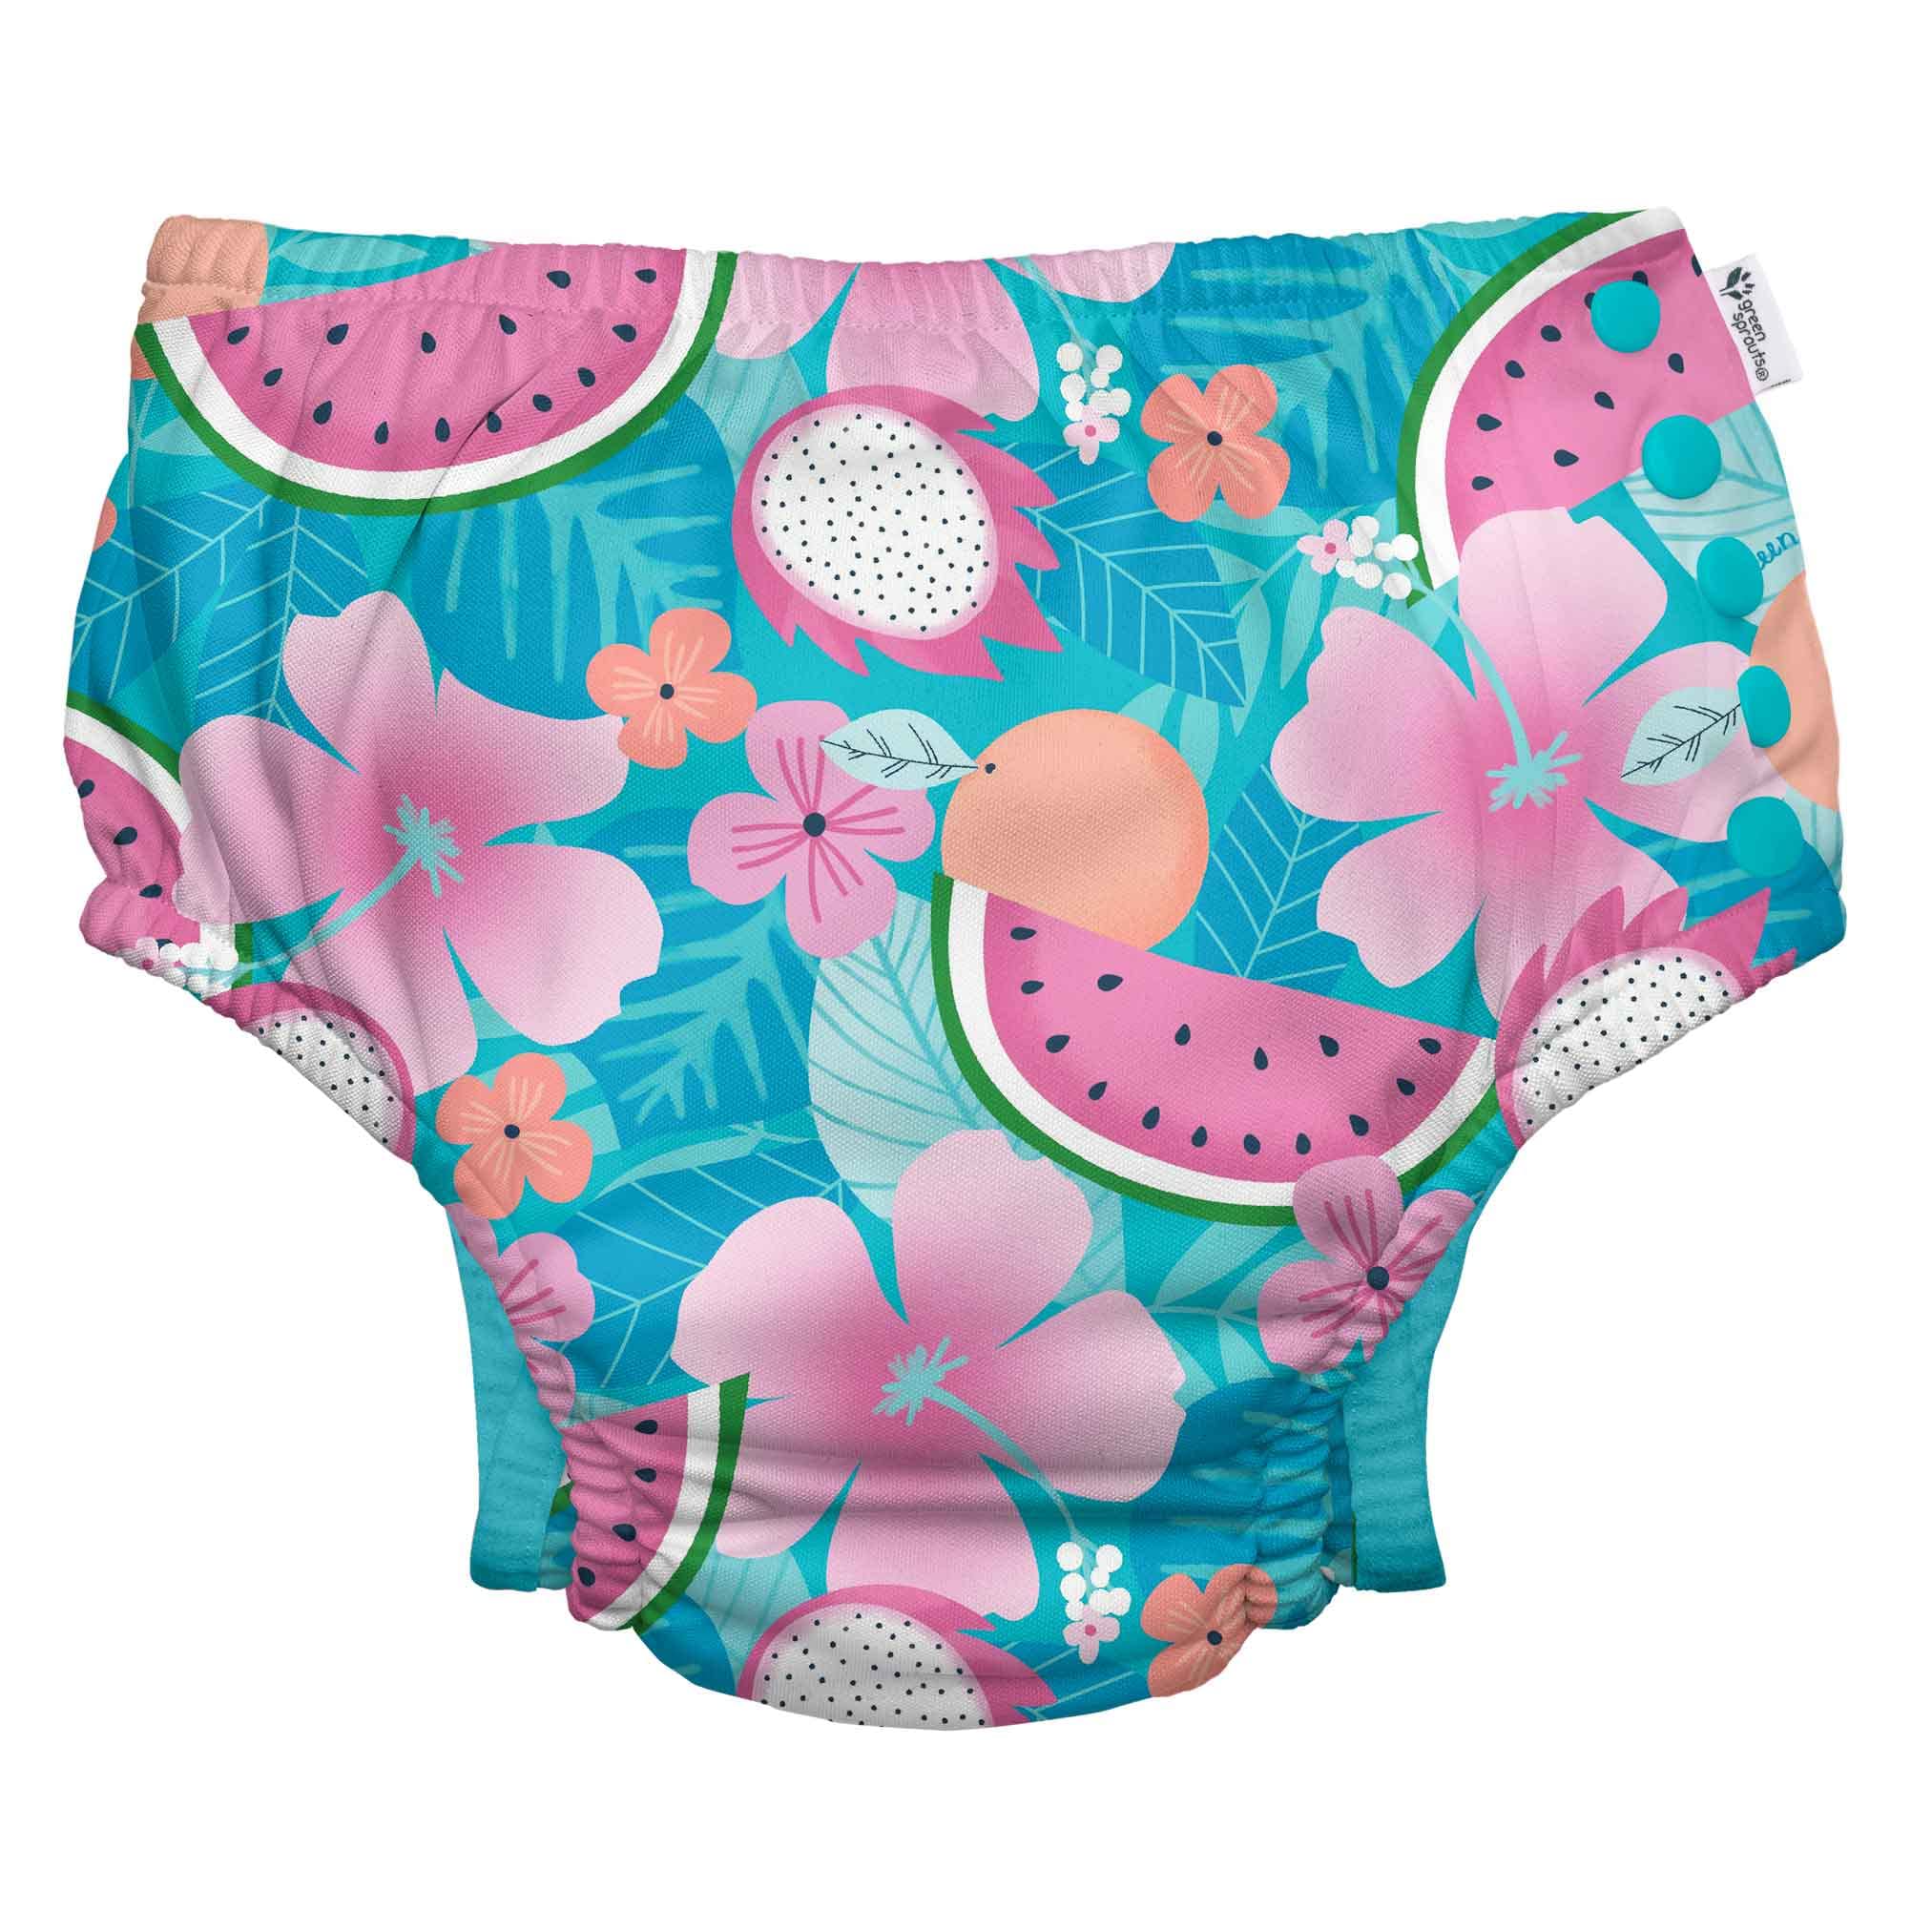 i play. by Green Sprouts Reusable, Eco Snap Swim Diaper with Gussets, UPF 50, Patented Design, Standard 100 by Oeko-TEX Certified - 6 mo - 5T